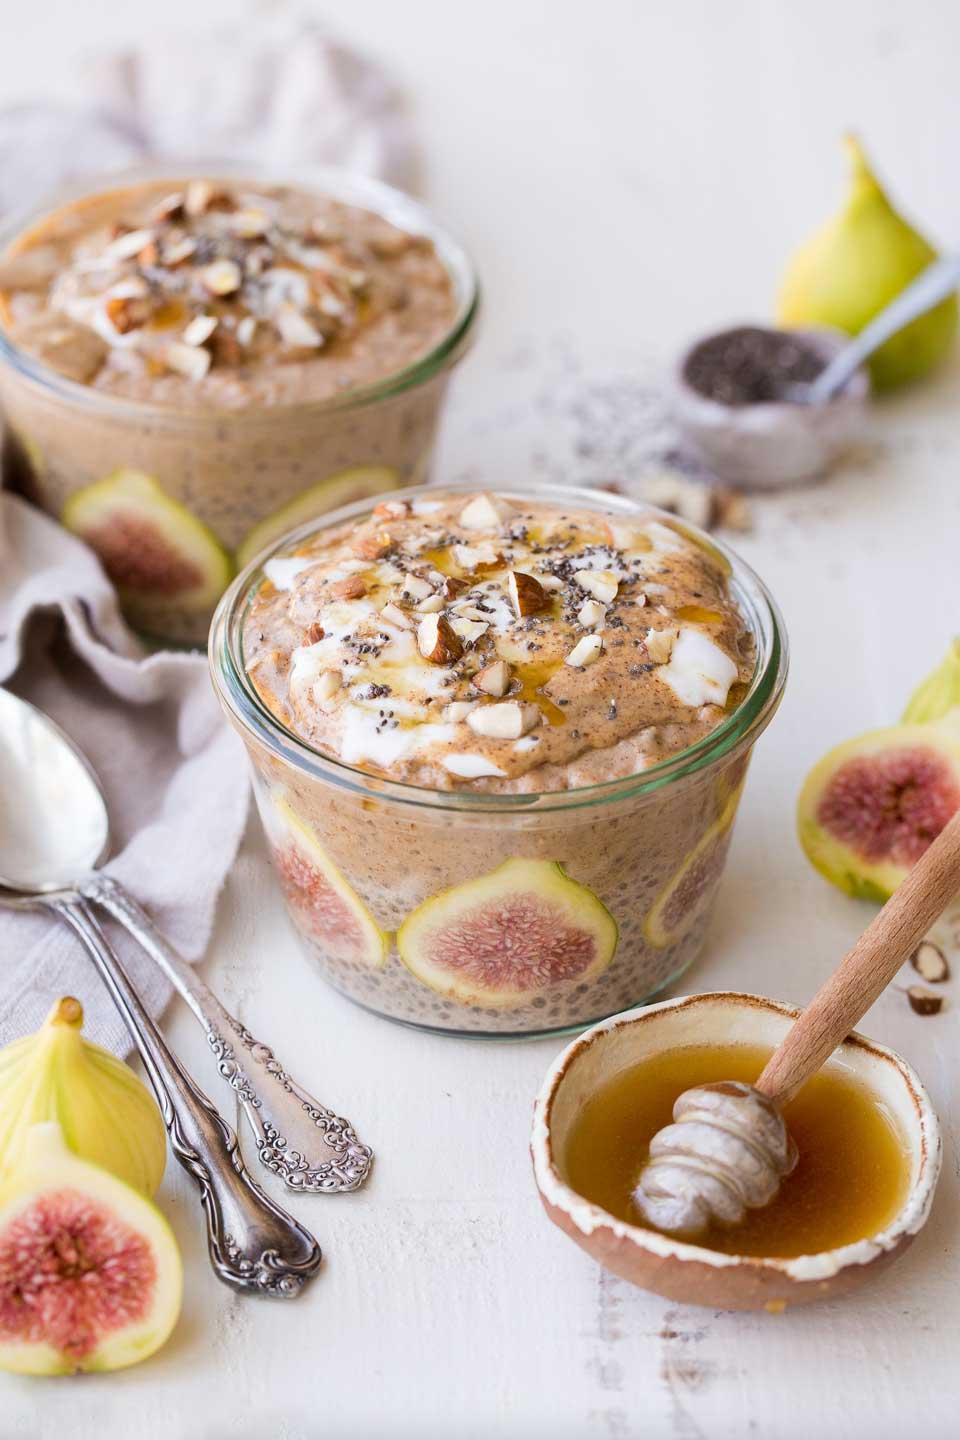 Two squat glass jars of this chia pudding, with cut figs a bowl of honey, and spoons alongside.